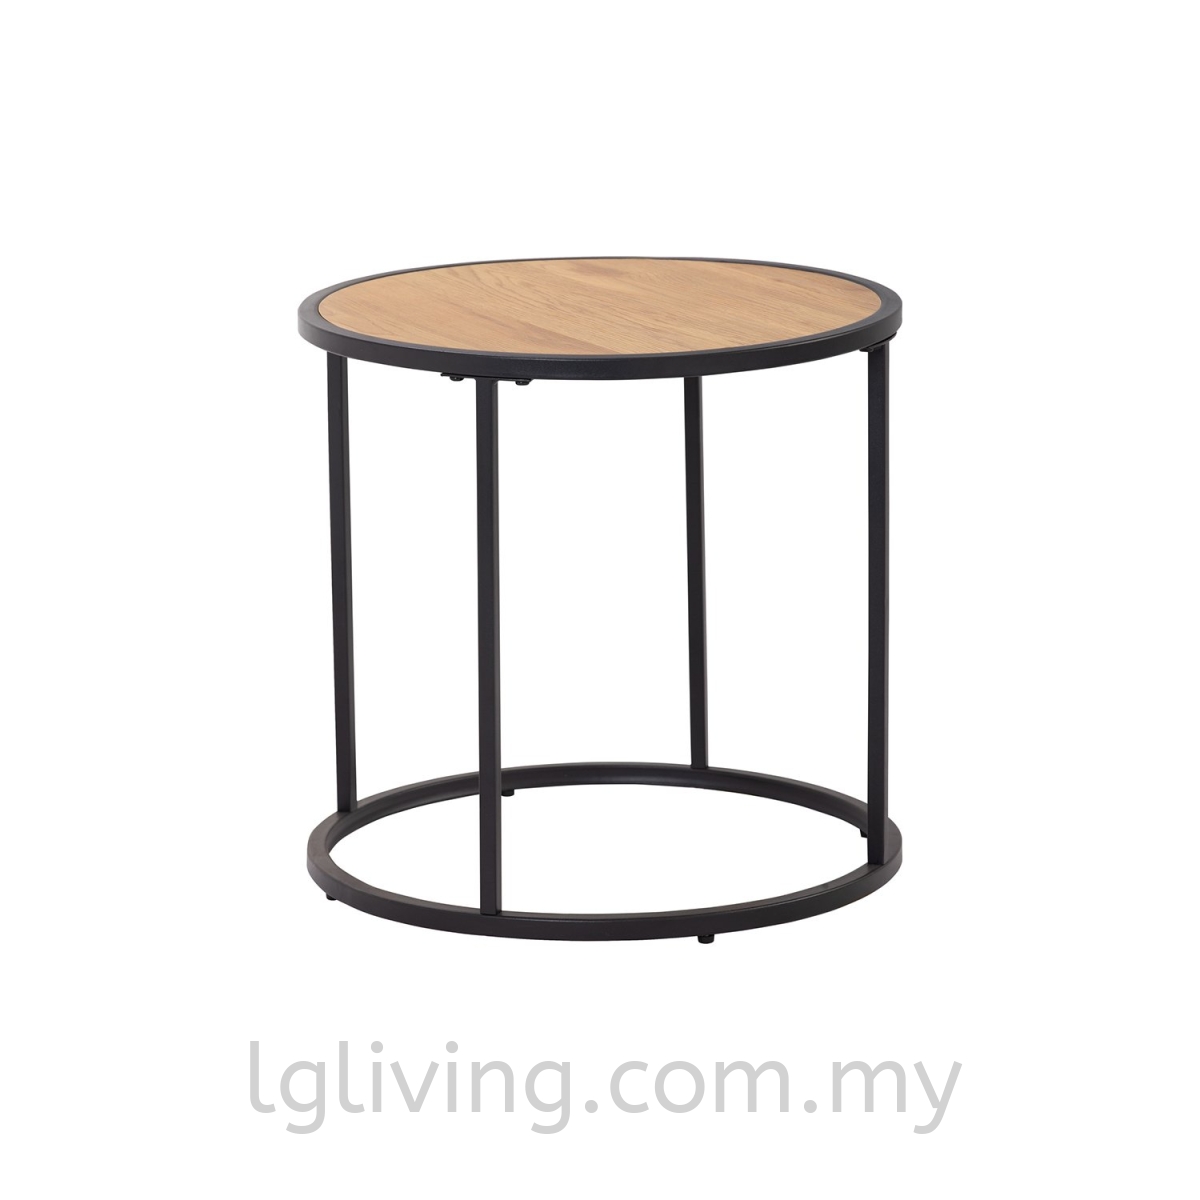 BRADFORD H430 LAMP TABLE 802/163 SIDE TABLES COFFEE / SIDE TABLES LIVING  Penang, Malaysia Supplier, Suppliers,